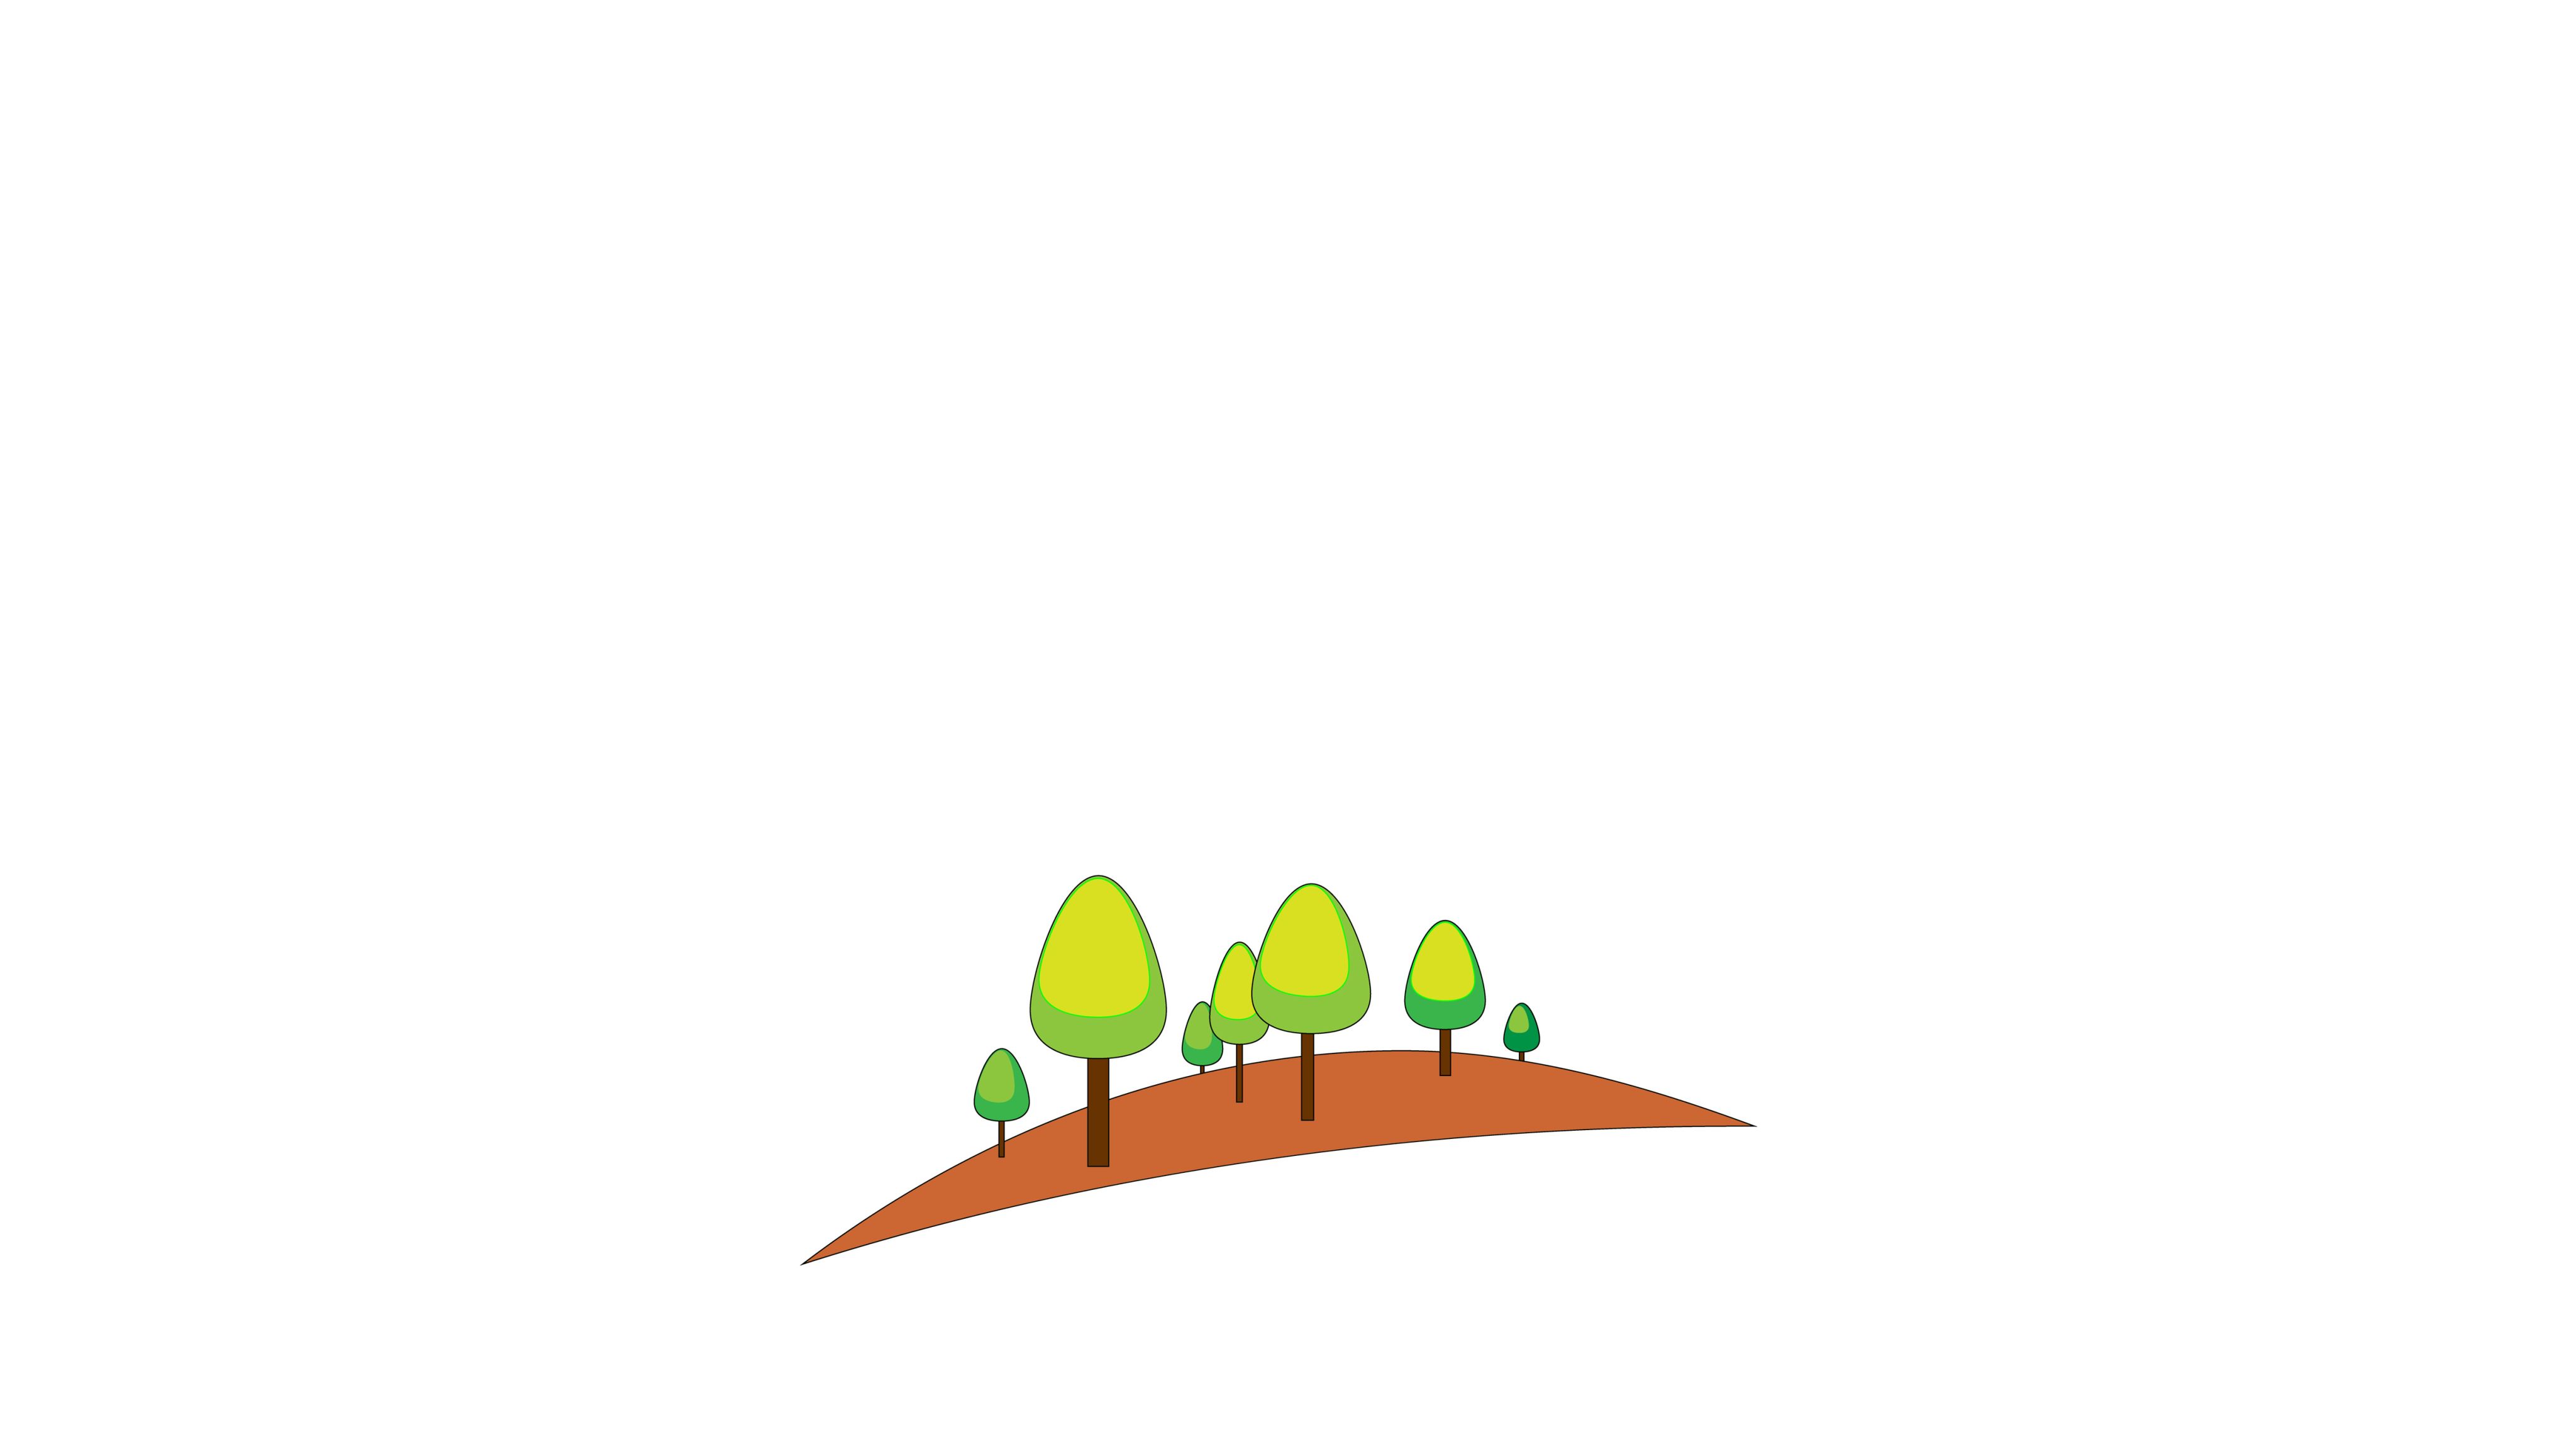 Illustration of trees on a hill